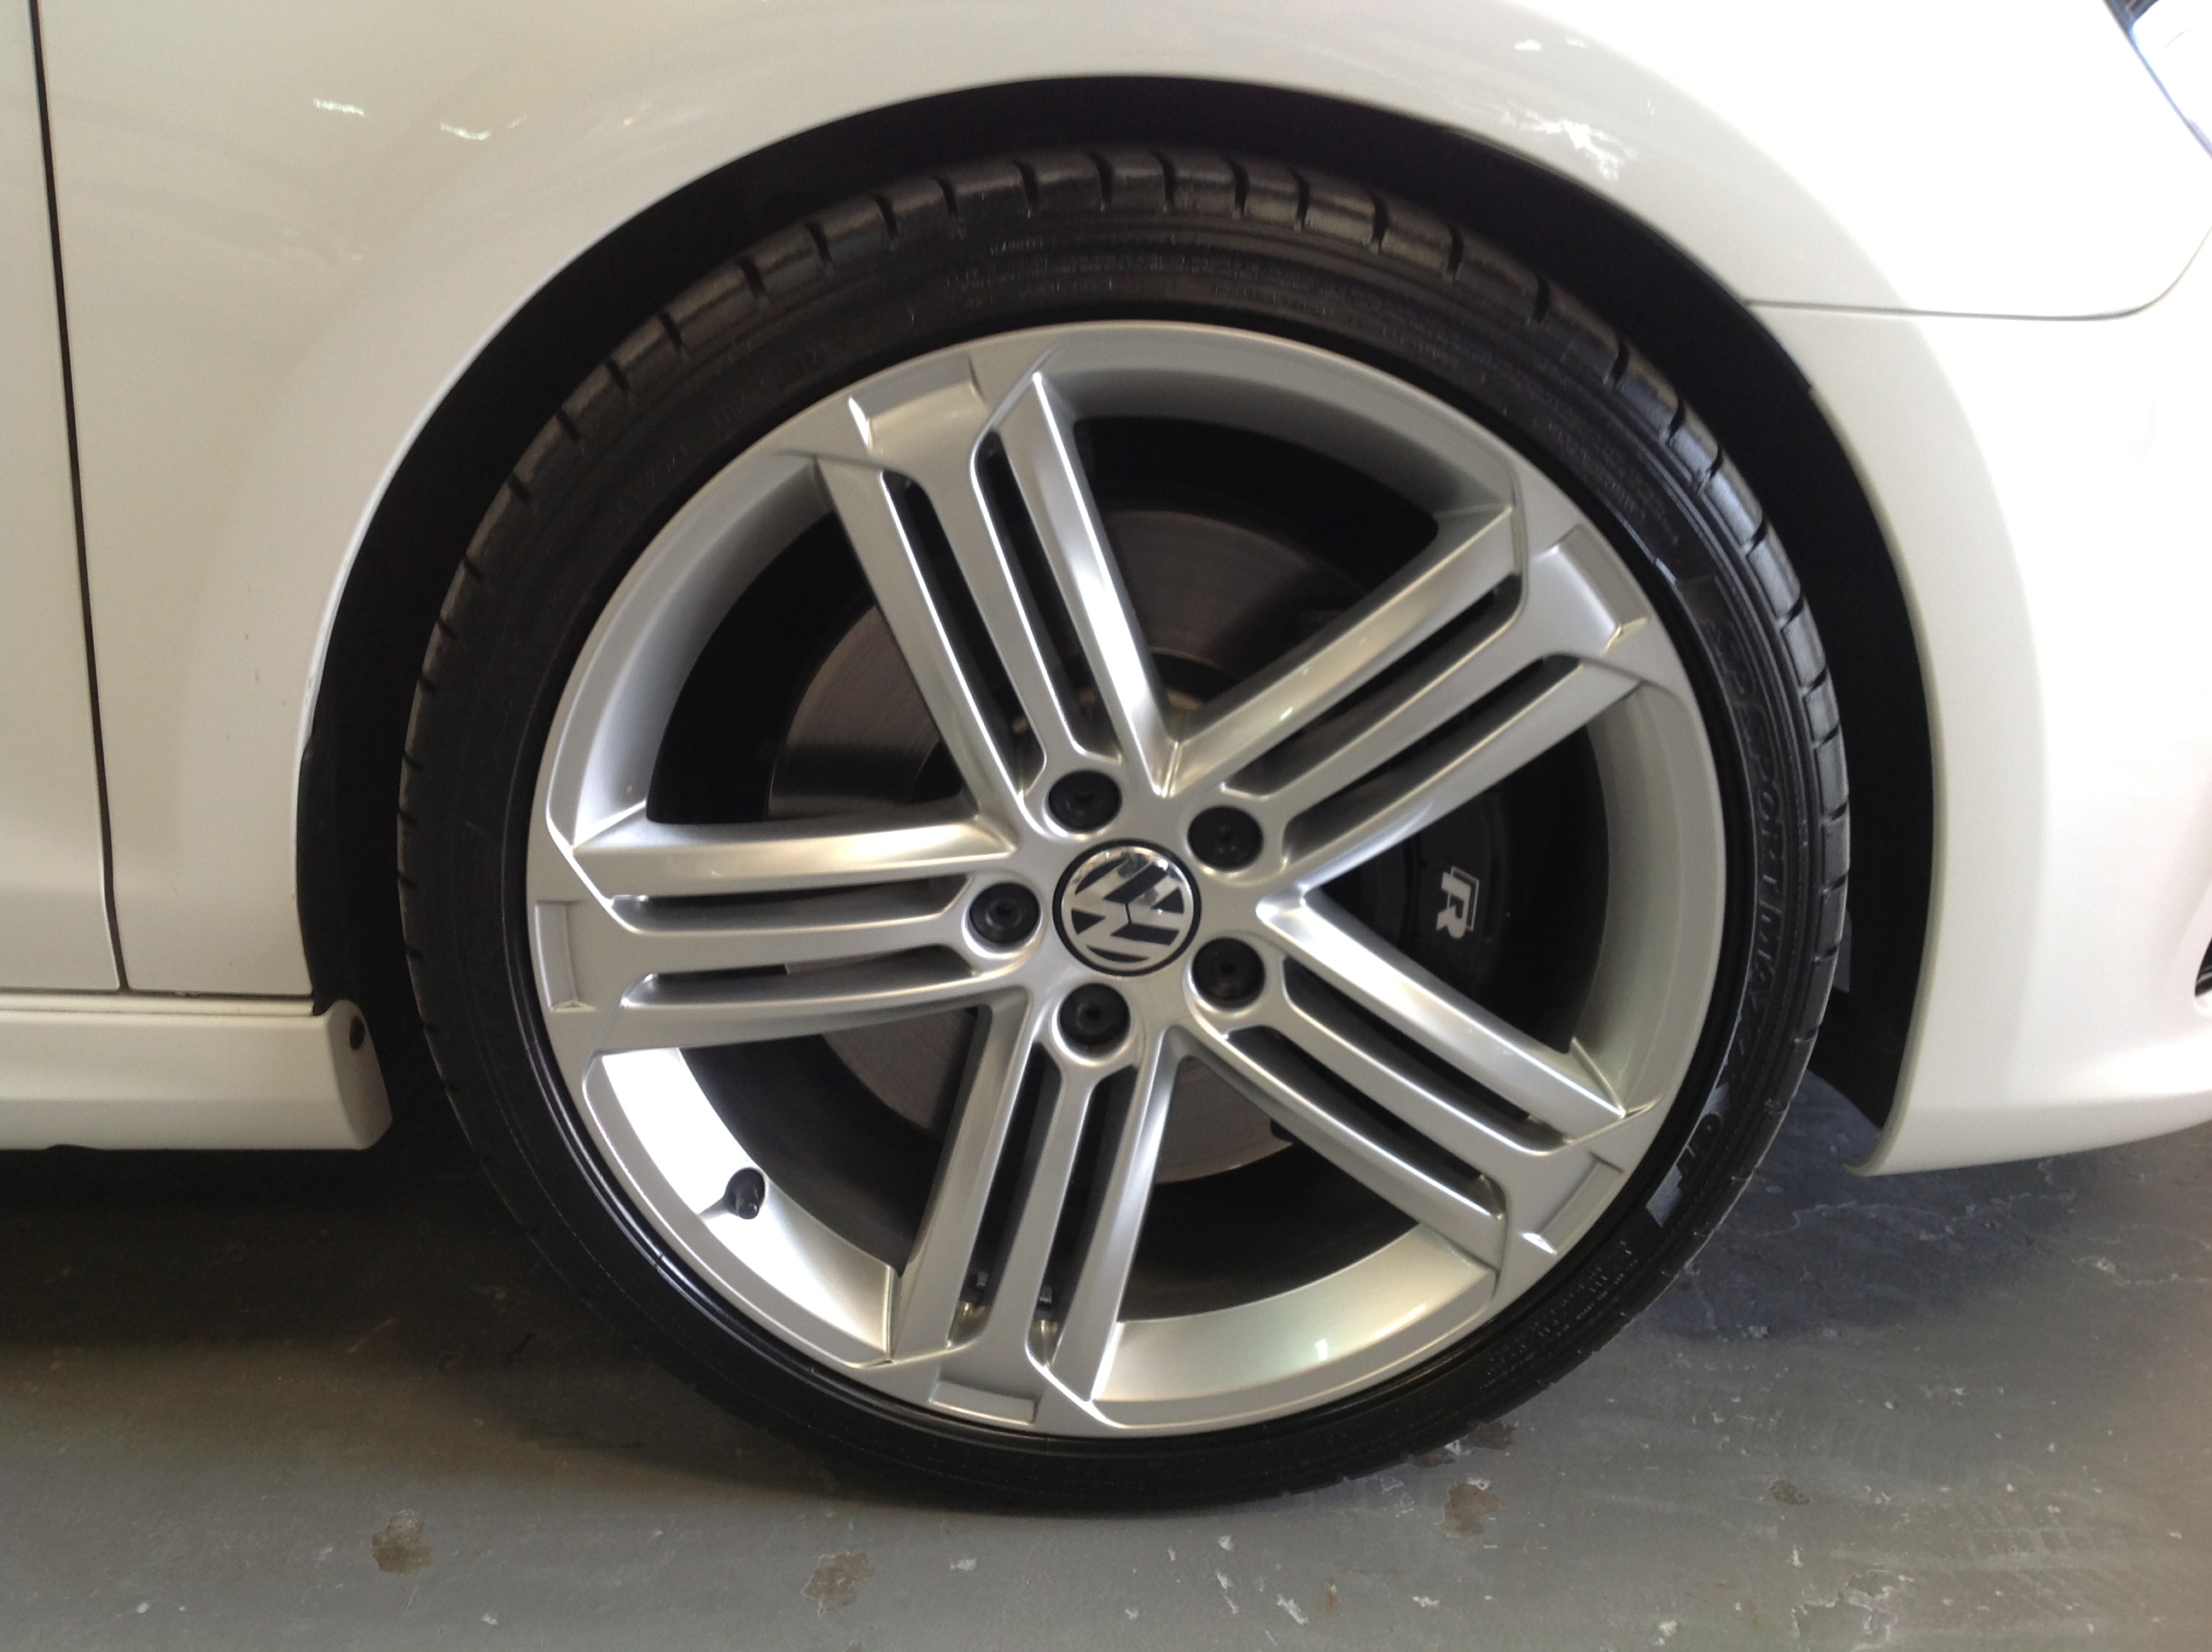 Car wheel and tire - Detailed view